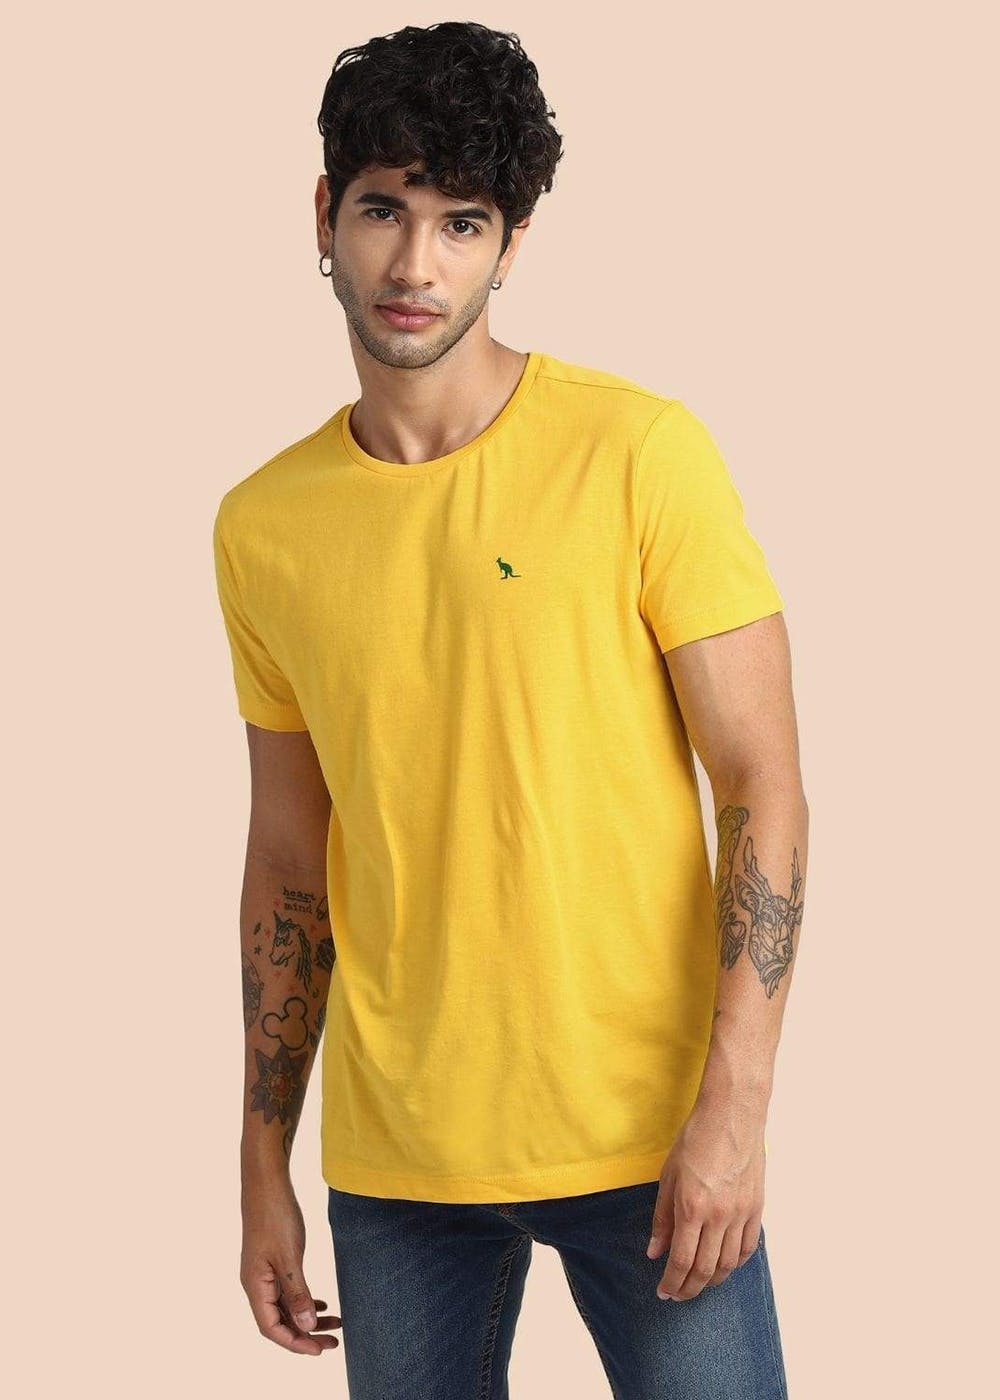 Get Solid Cotton Half Sleeves T Shirt At 553 Lbb Shop